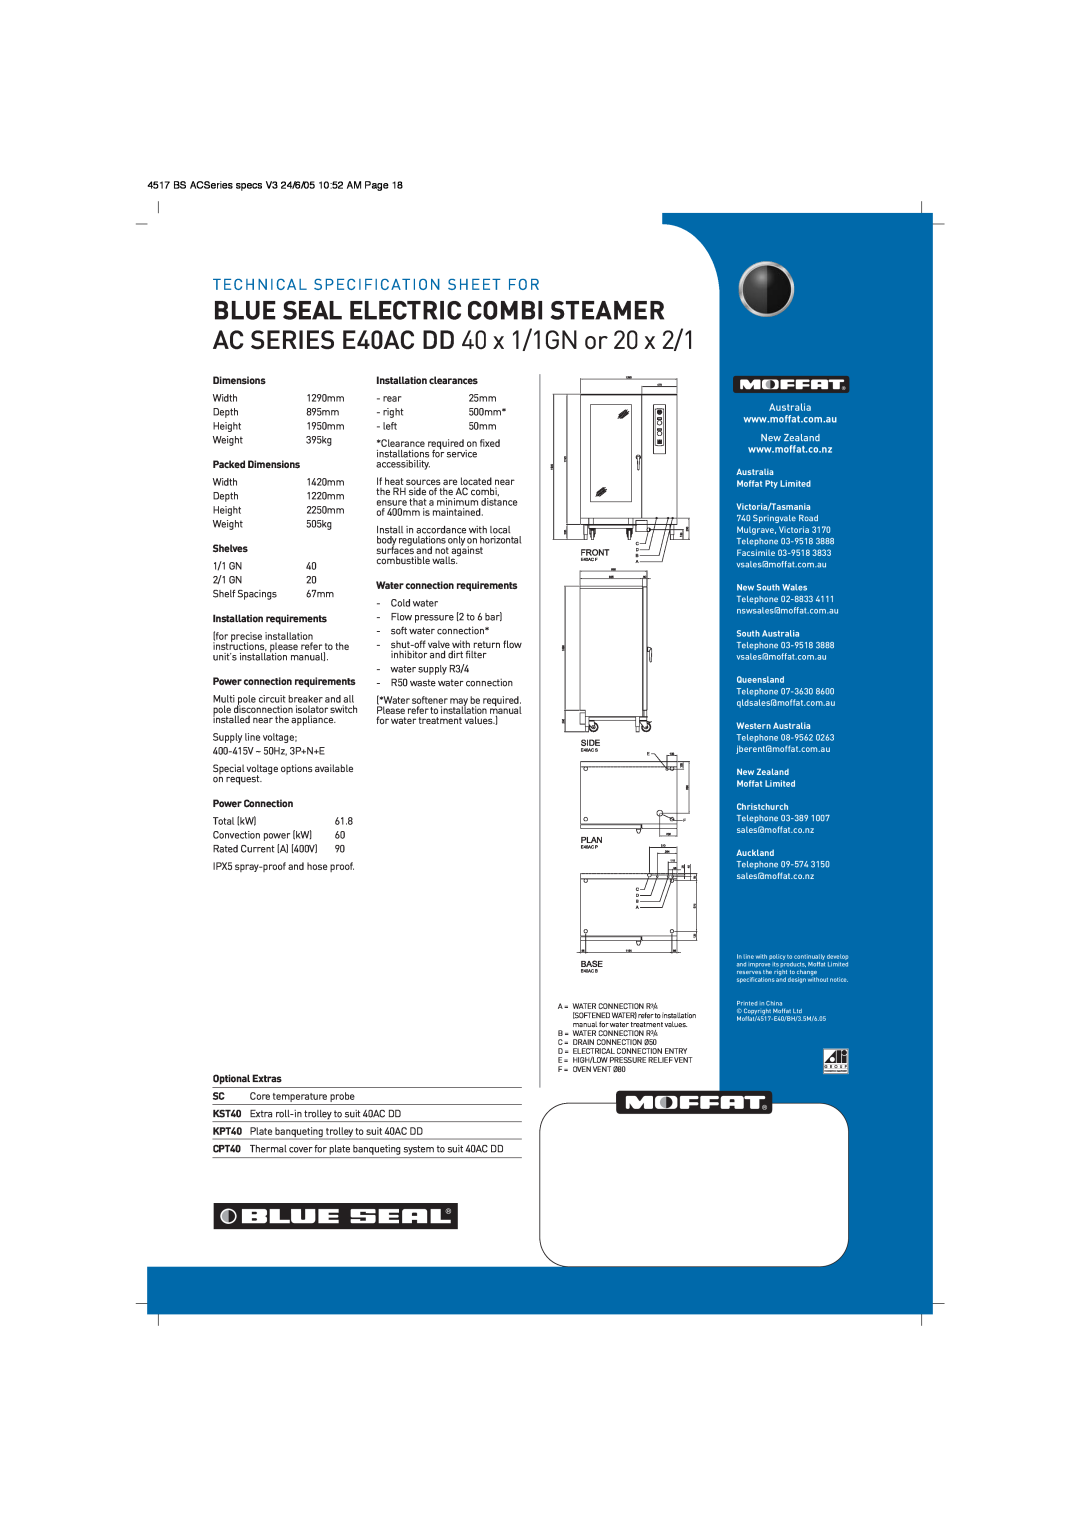 Moffat Blue Seal Electric Combi Steamer, AC SERIES E40AC DD 40 x 1/1GN or 20 x 2/1, Technical Specification Sheet For 